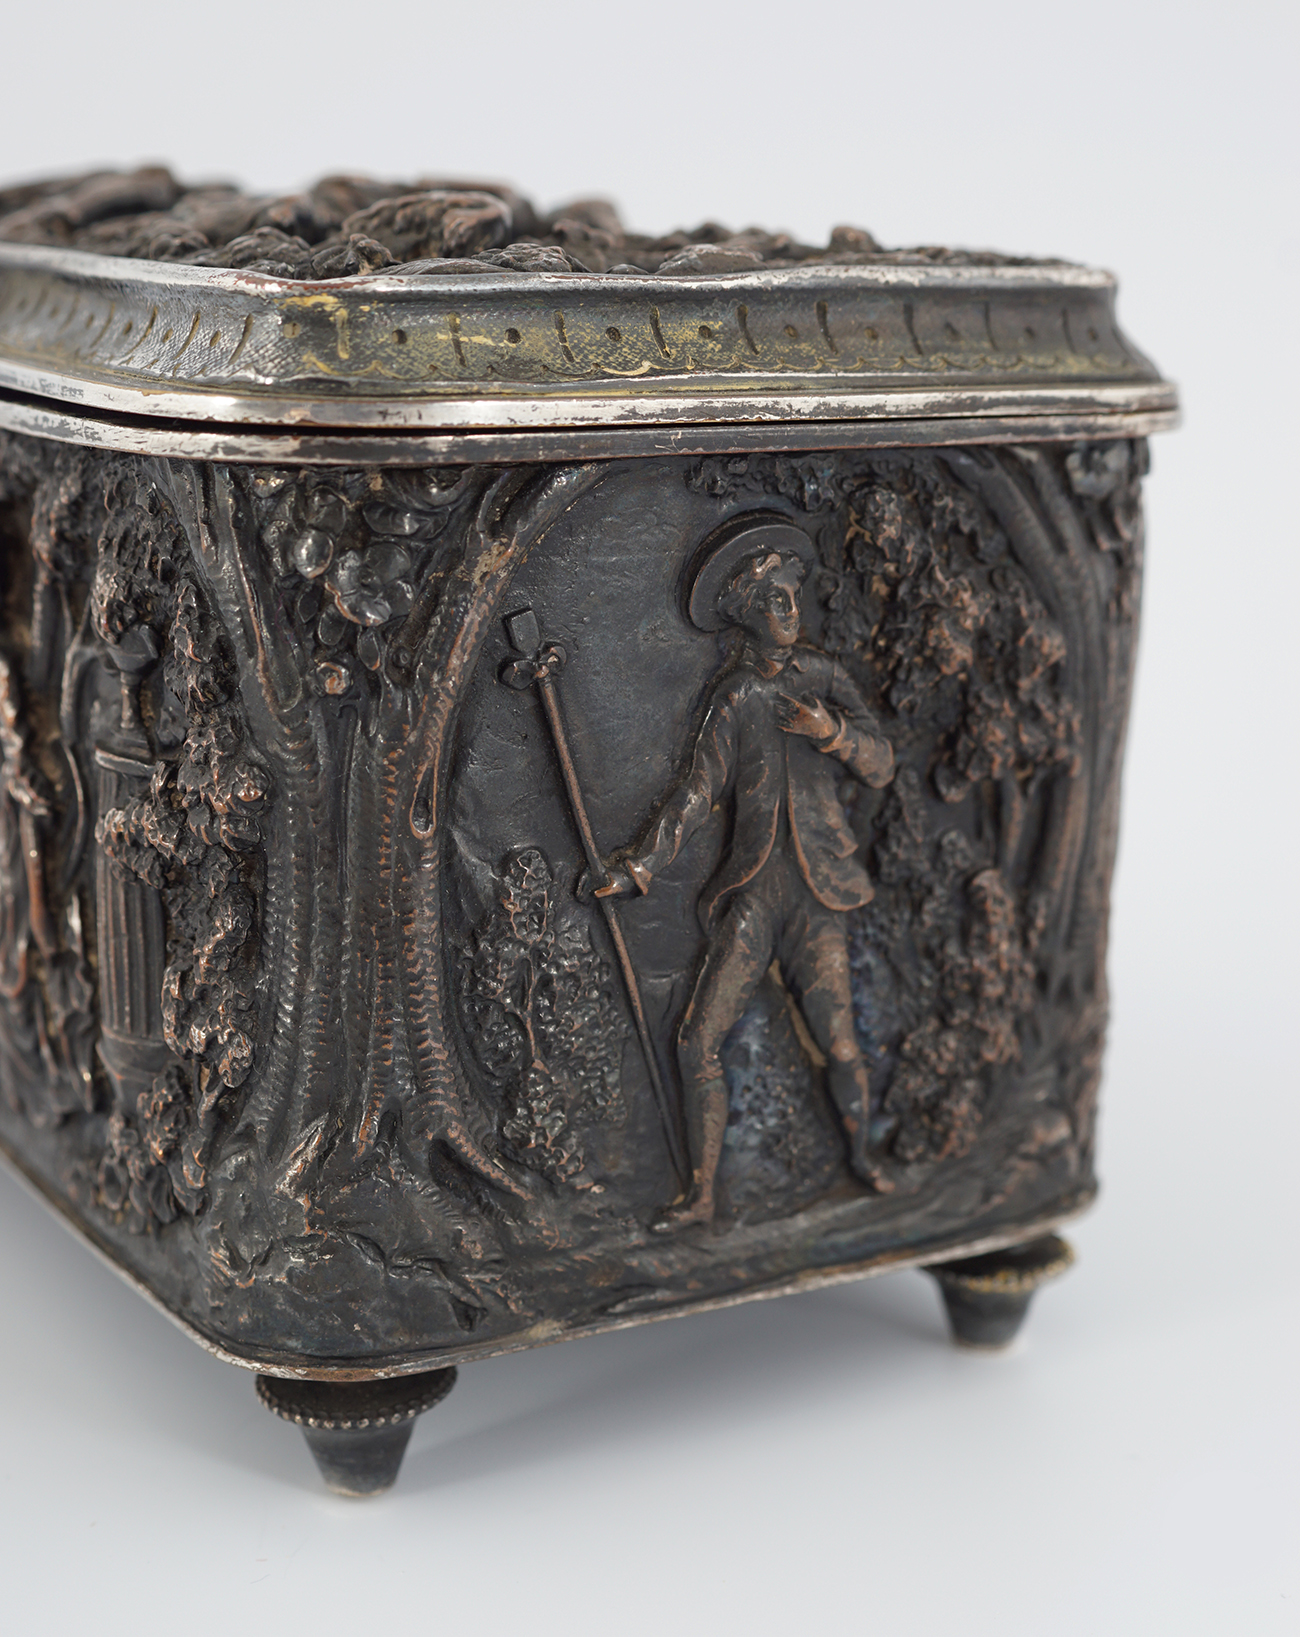 19TH-CENTURY PLATED JEWELLERY BOX - Image 6 of 10